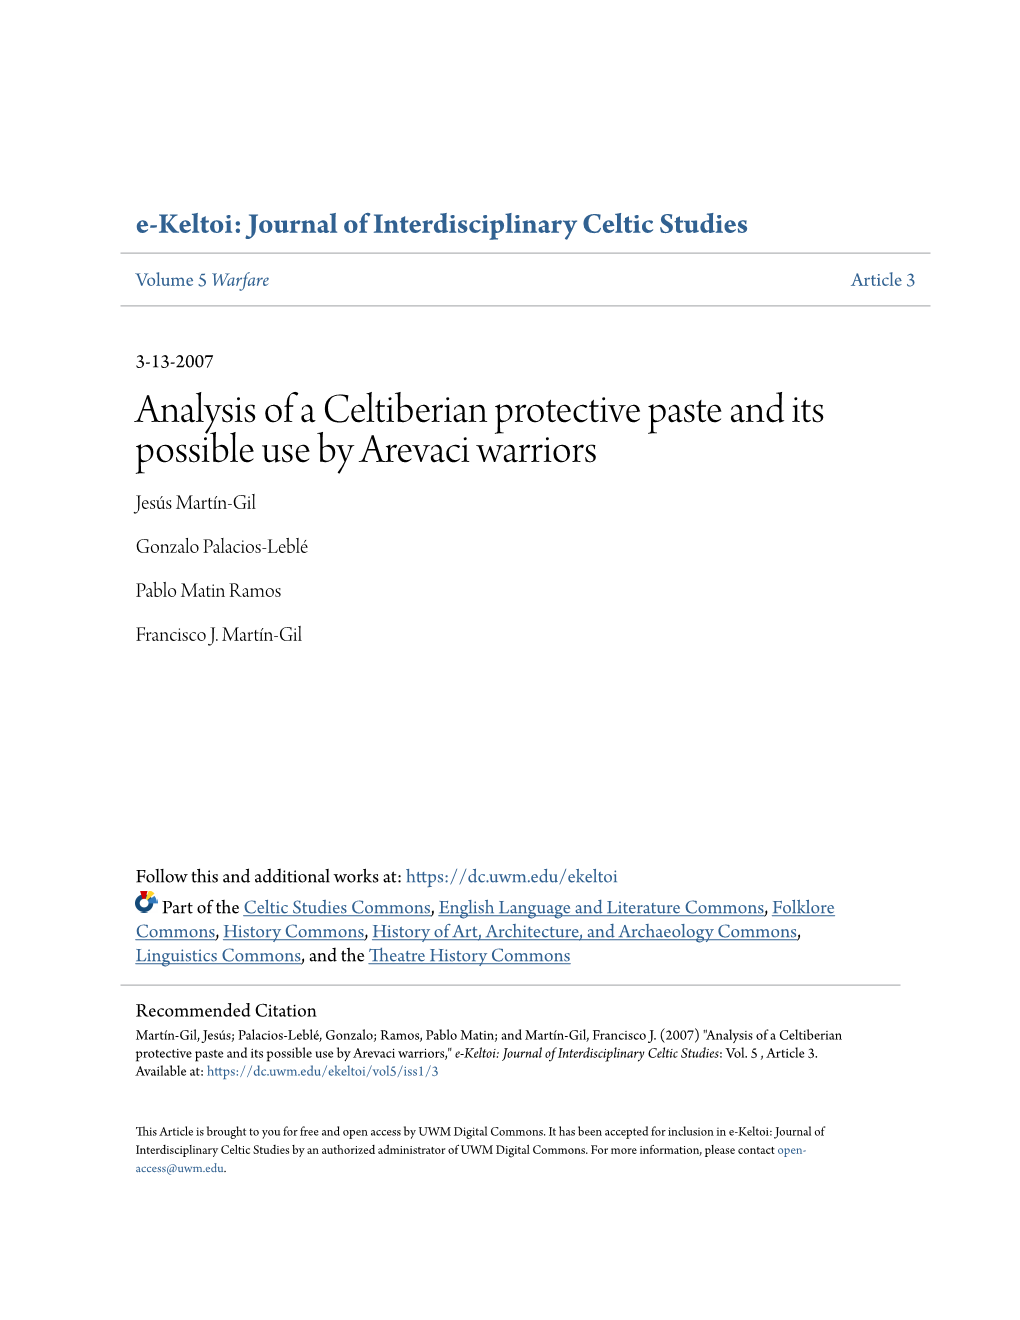 Analysis of a Celtiberian Protective Paste and Its Possible Use by Arevaci Warriors Jesús Martín-Gil